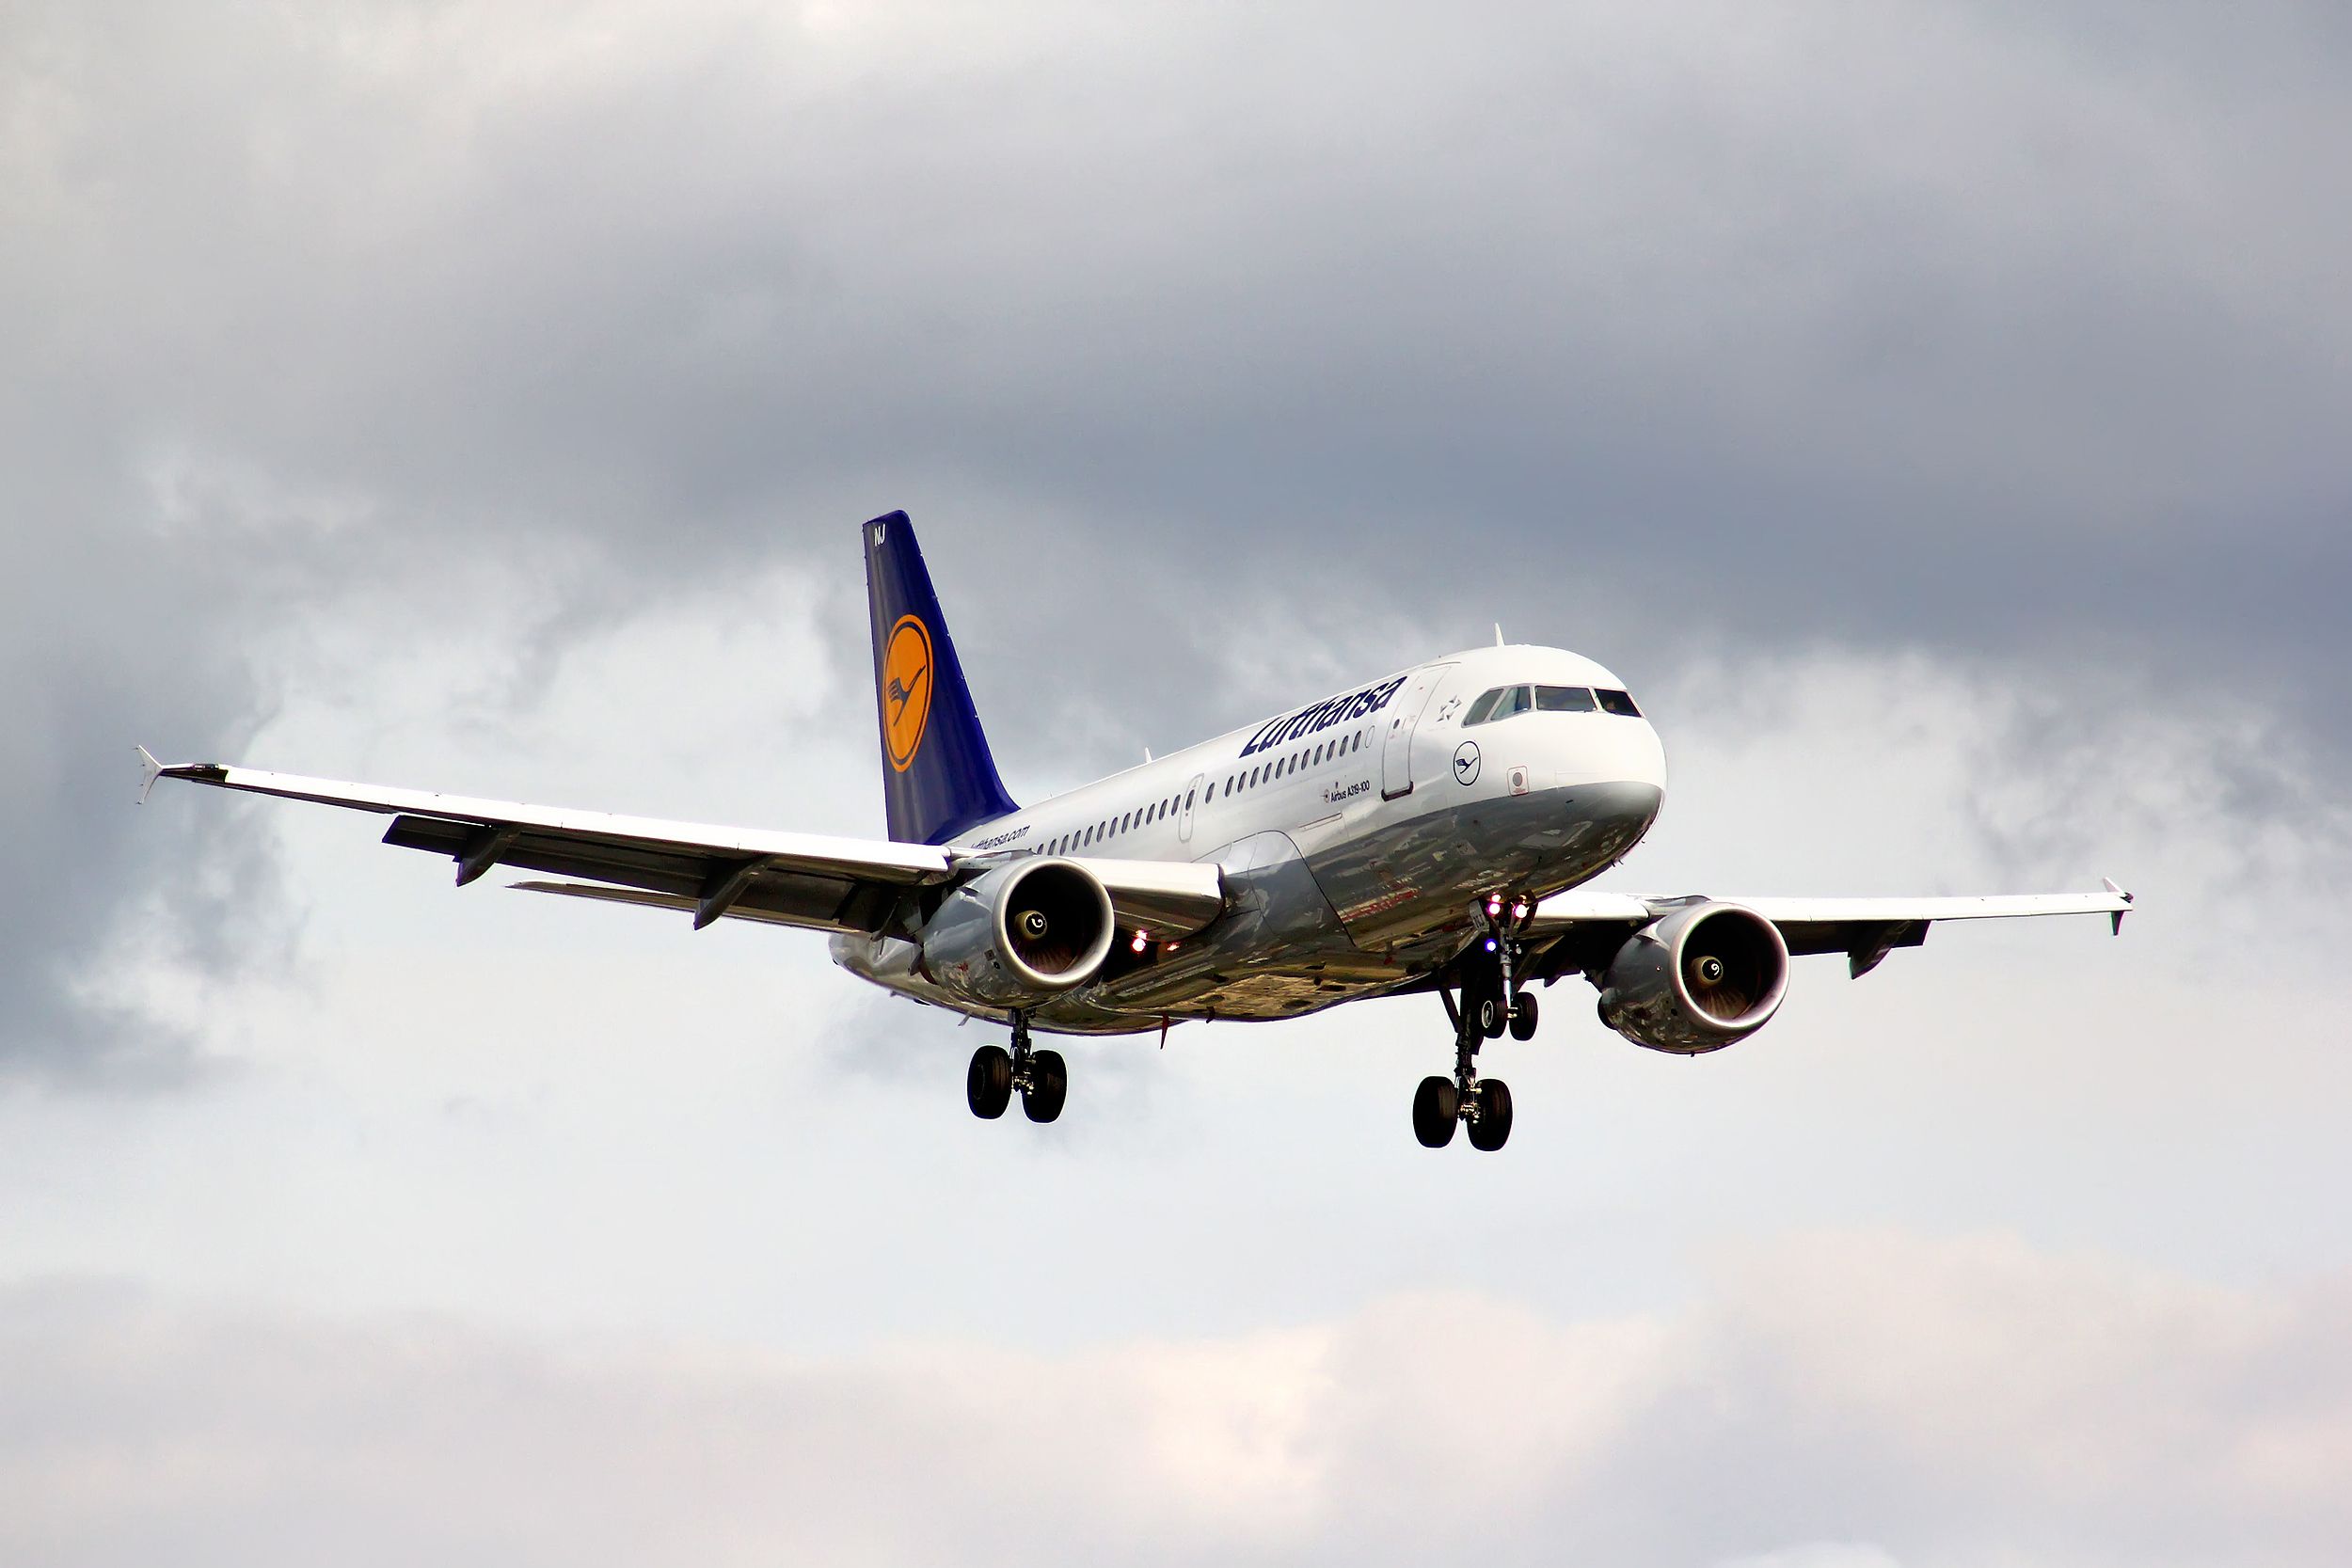 Lufthansa Airbus A319 arrives to the Tegel International Airport.